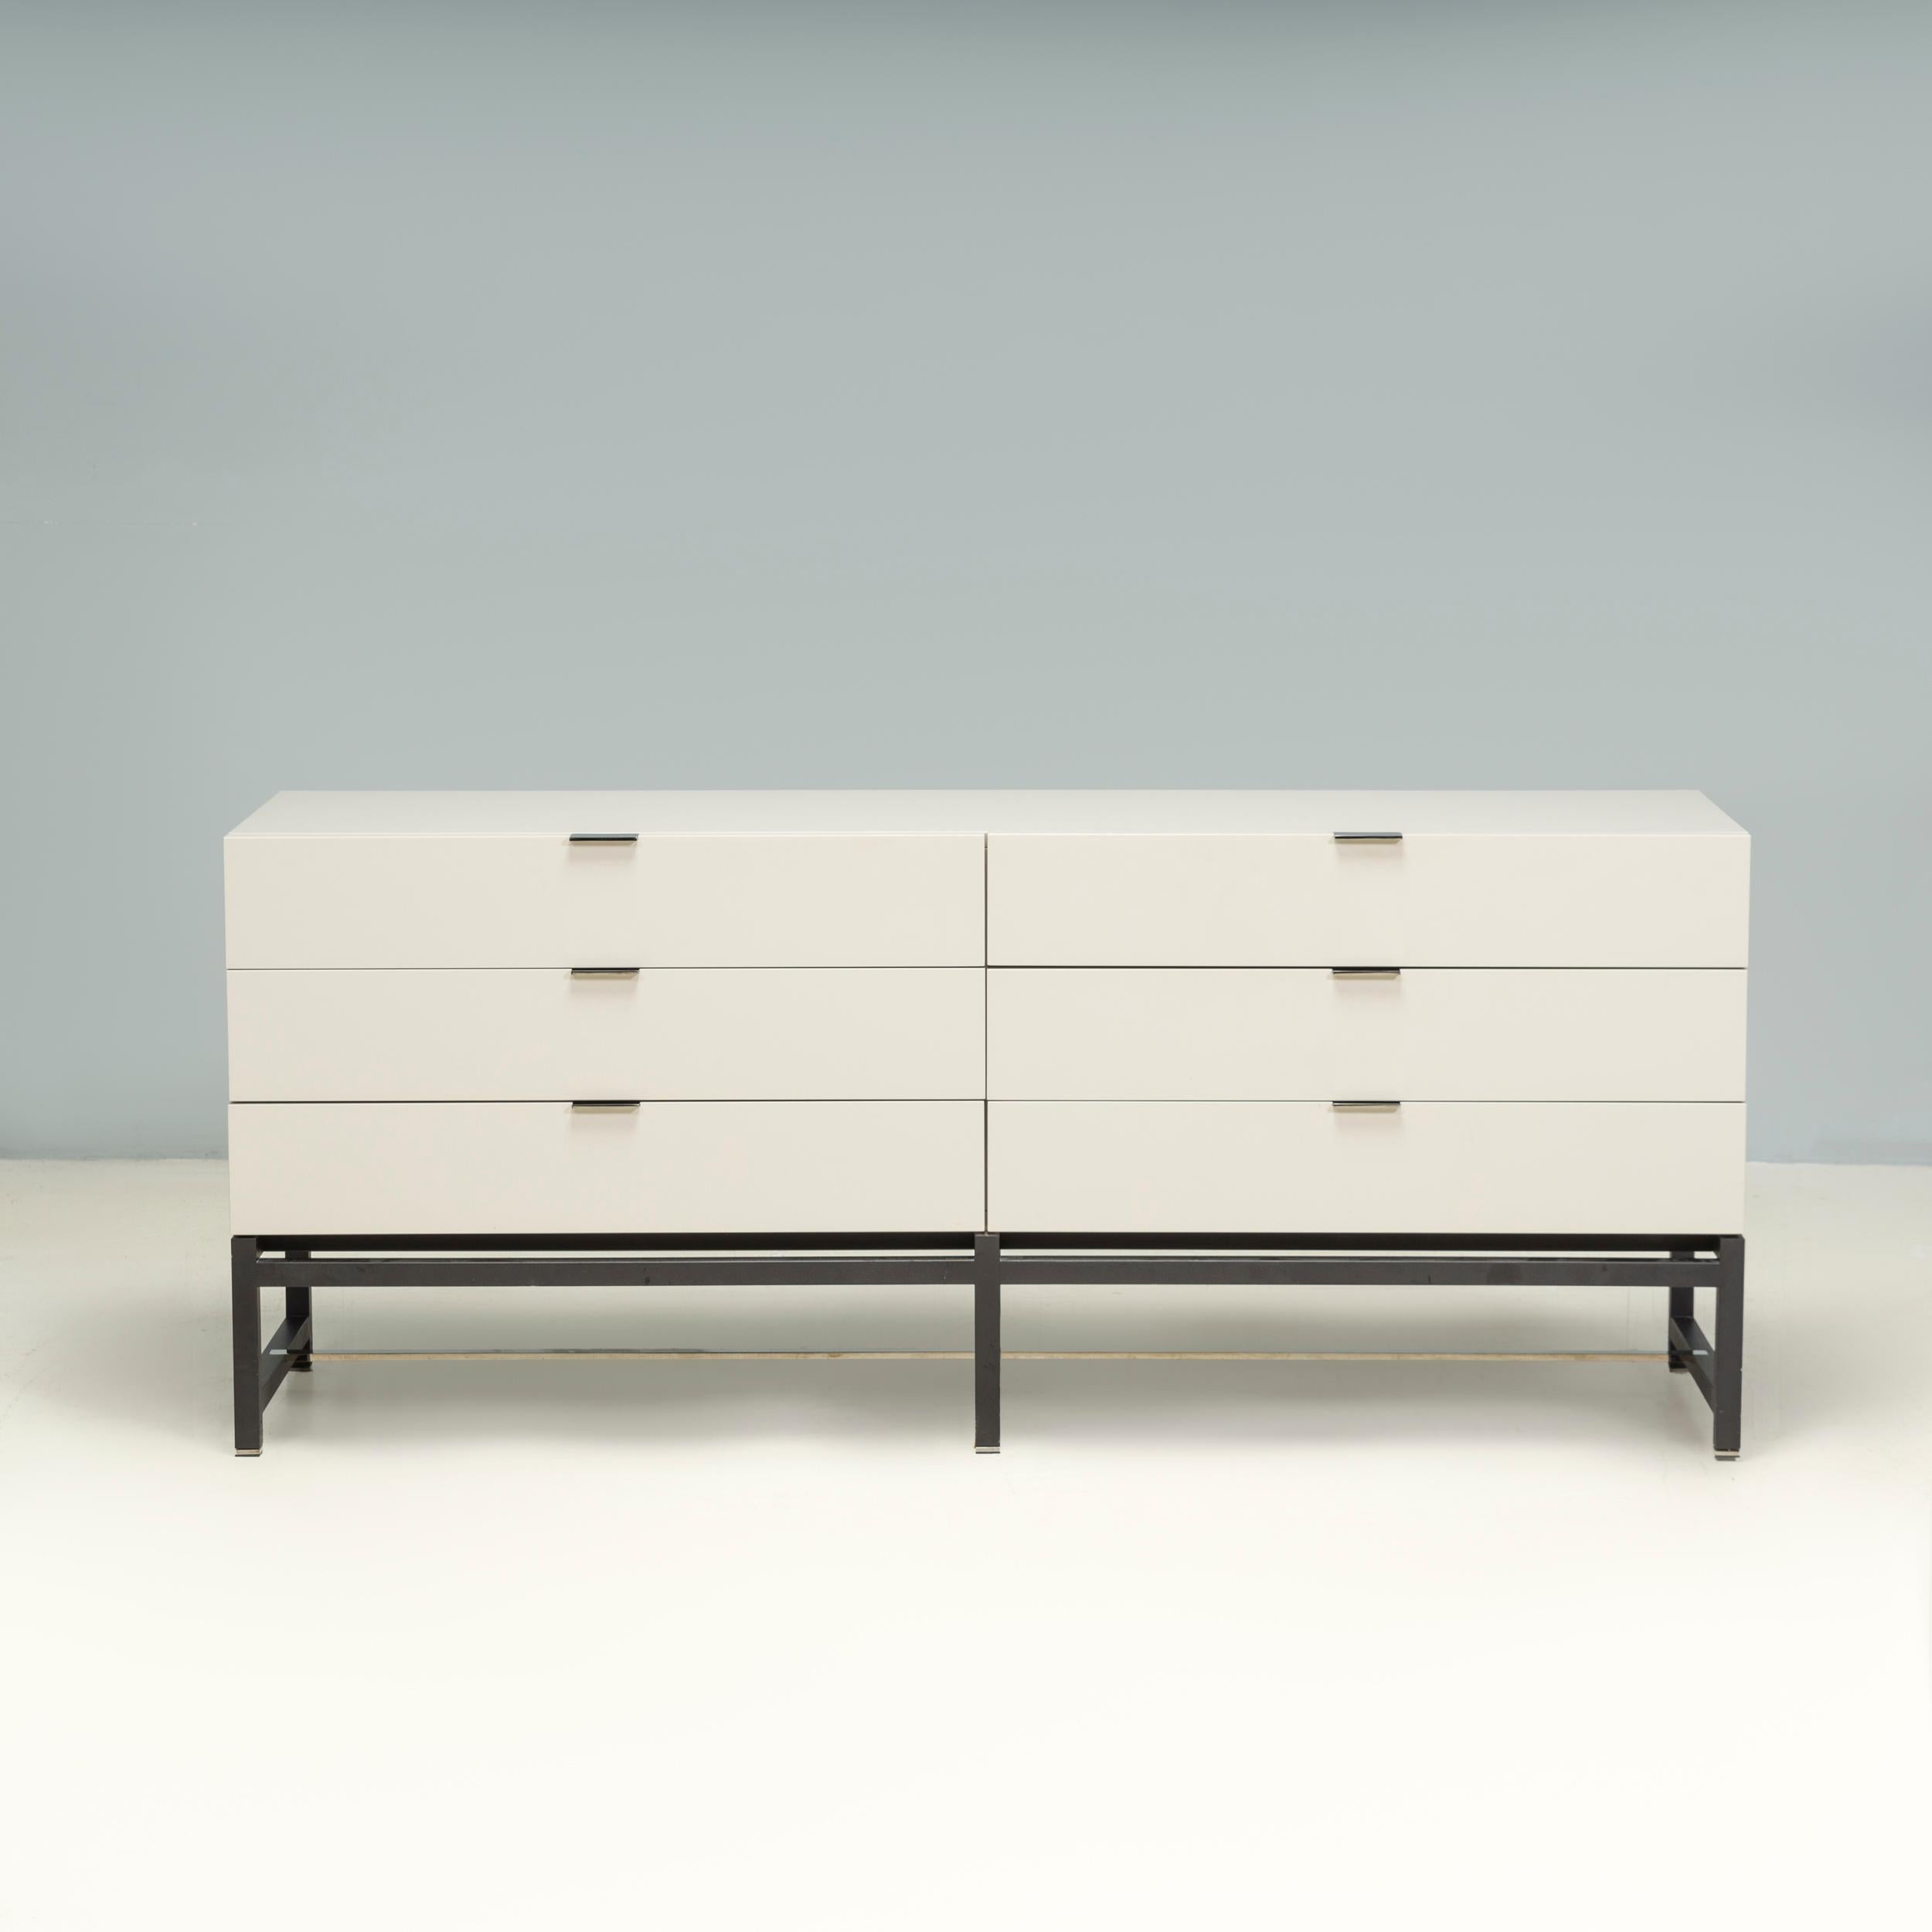 Designed by Rodolfo Dordoni for Minotti, the Harvey chest of drawers is a fantastic example of contemporary design.

Constructed from wood with a white gloss lacquer finish, the chest of drawers sits on an angular base in a contrasting Moka